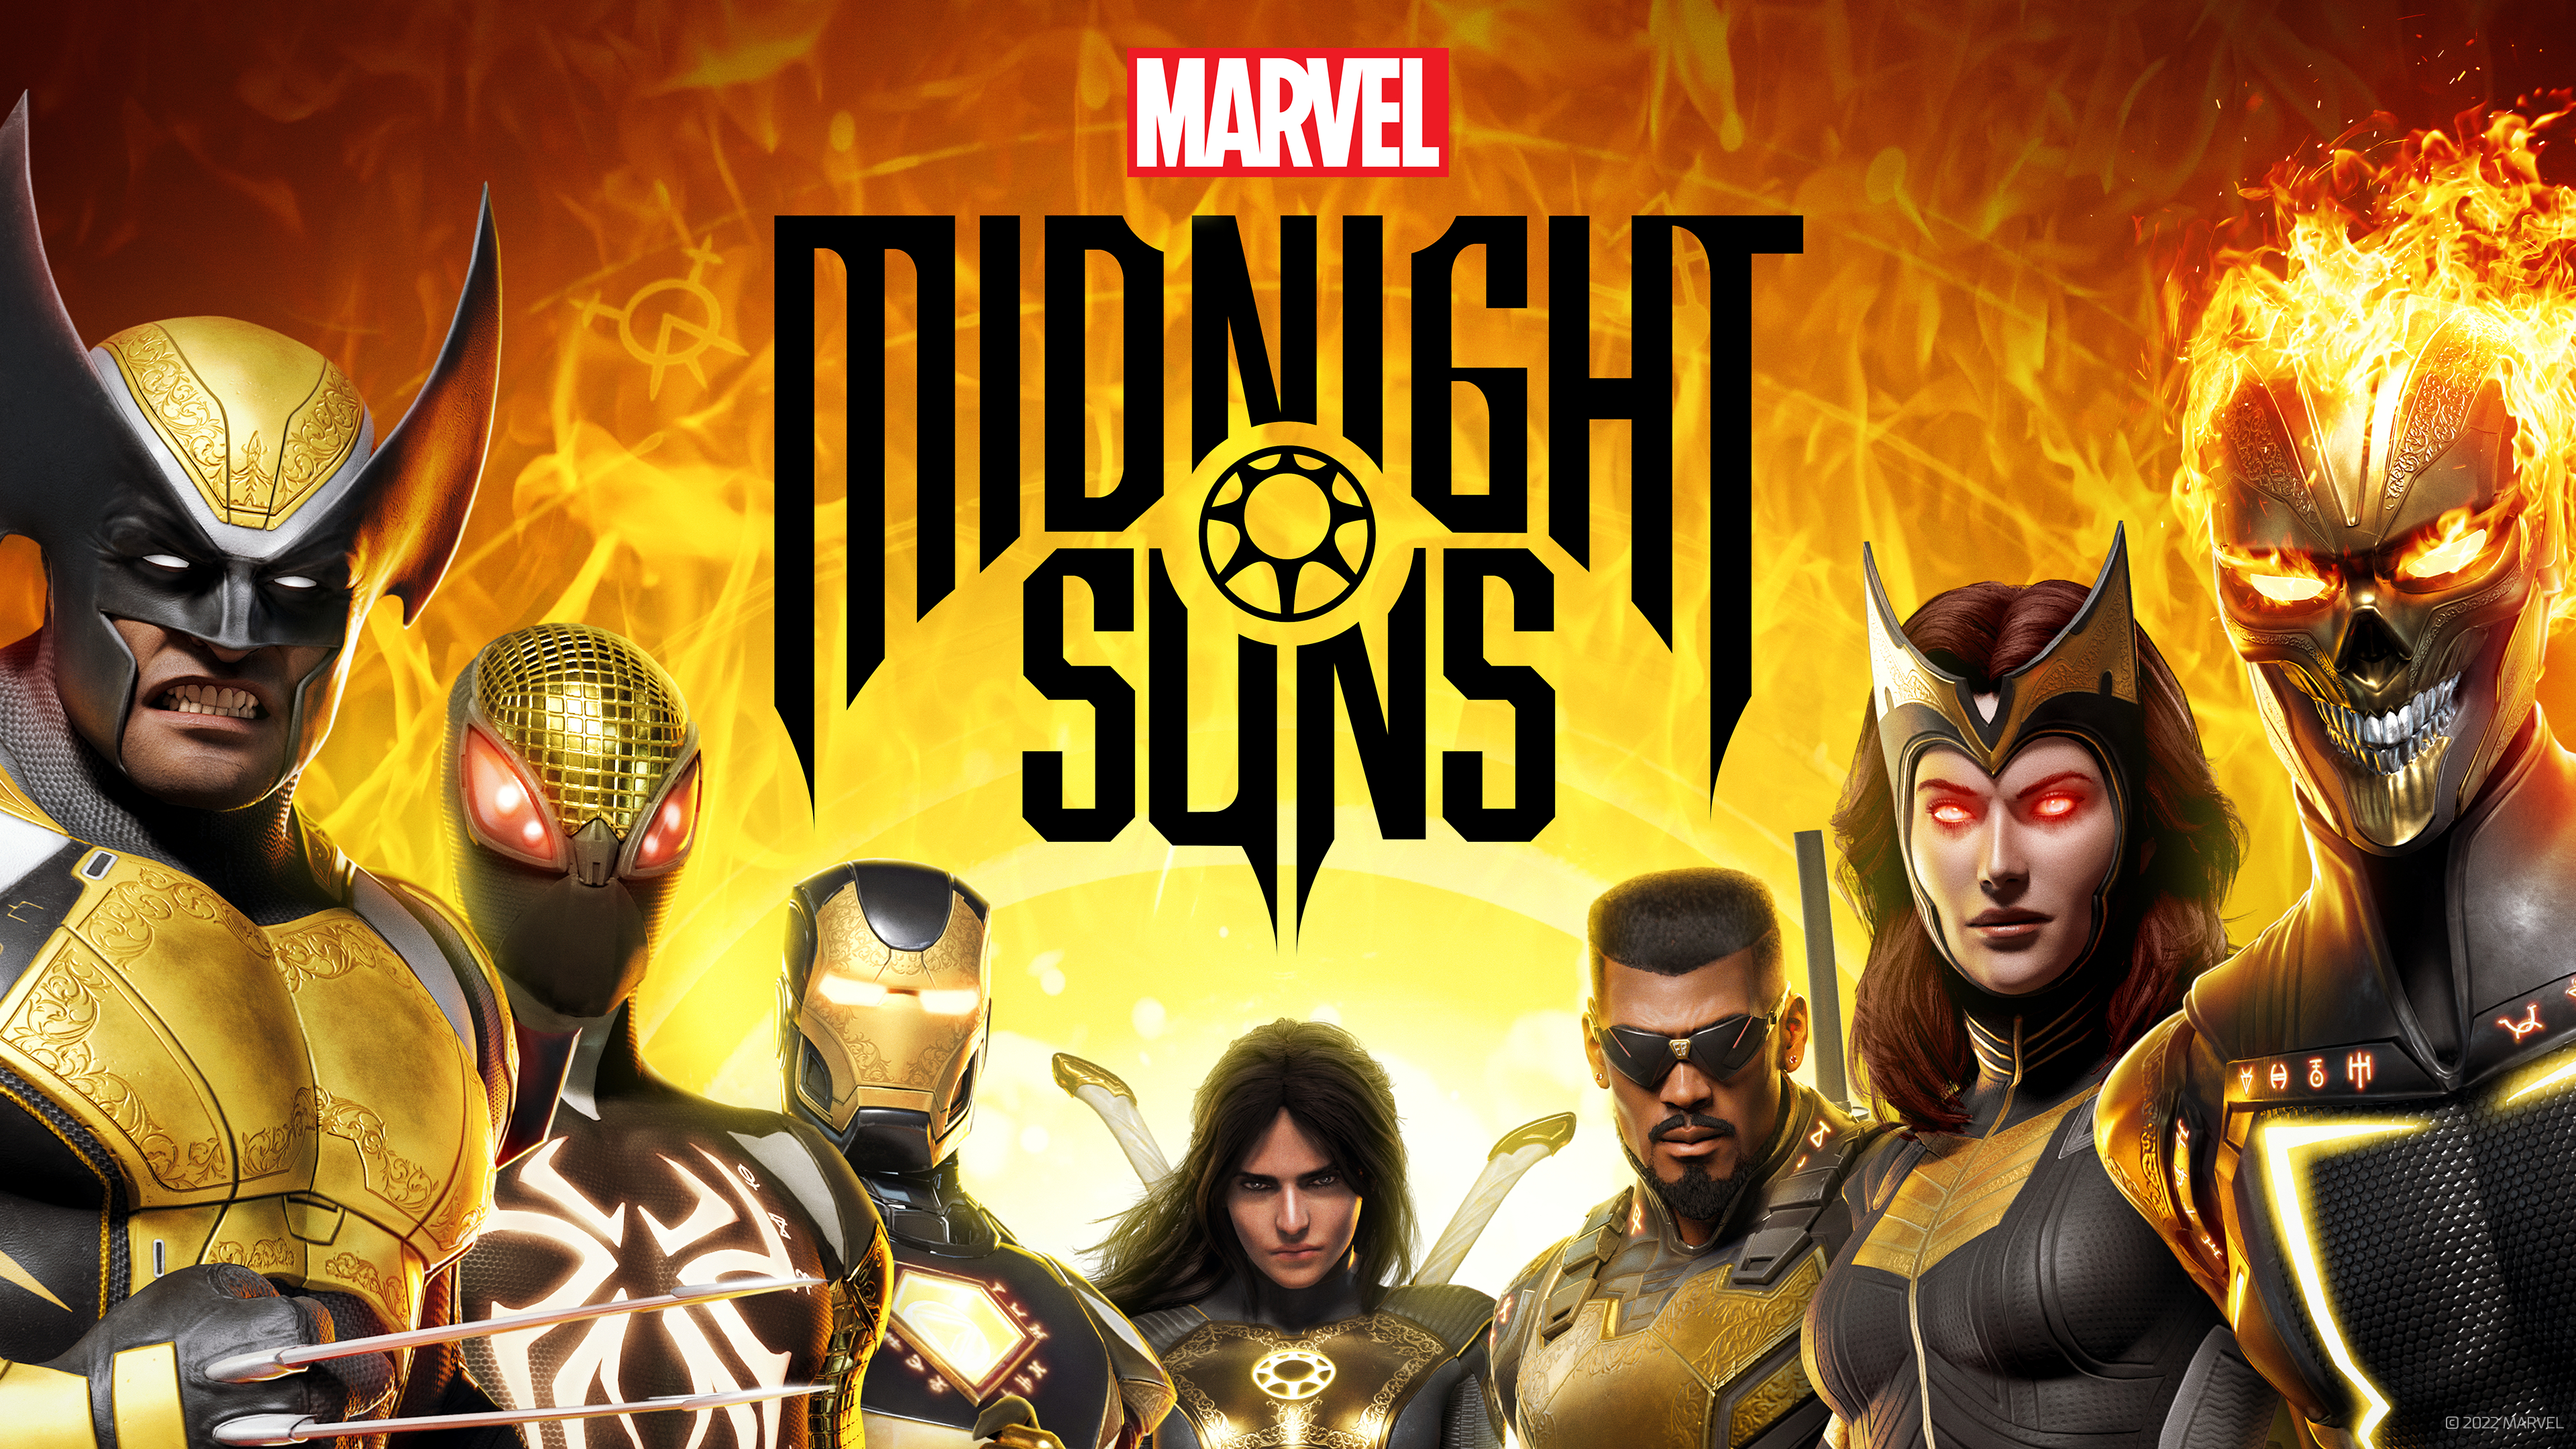 Marvel's Midnight Suns Switch Version Officially Canceled - IGN